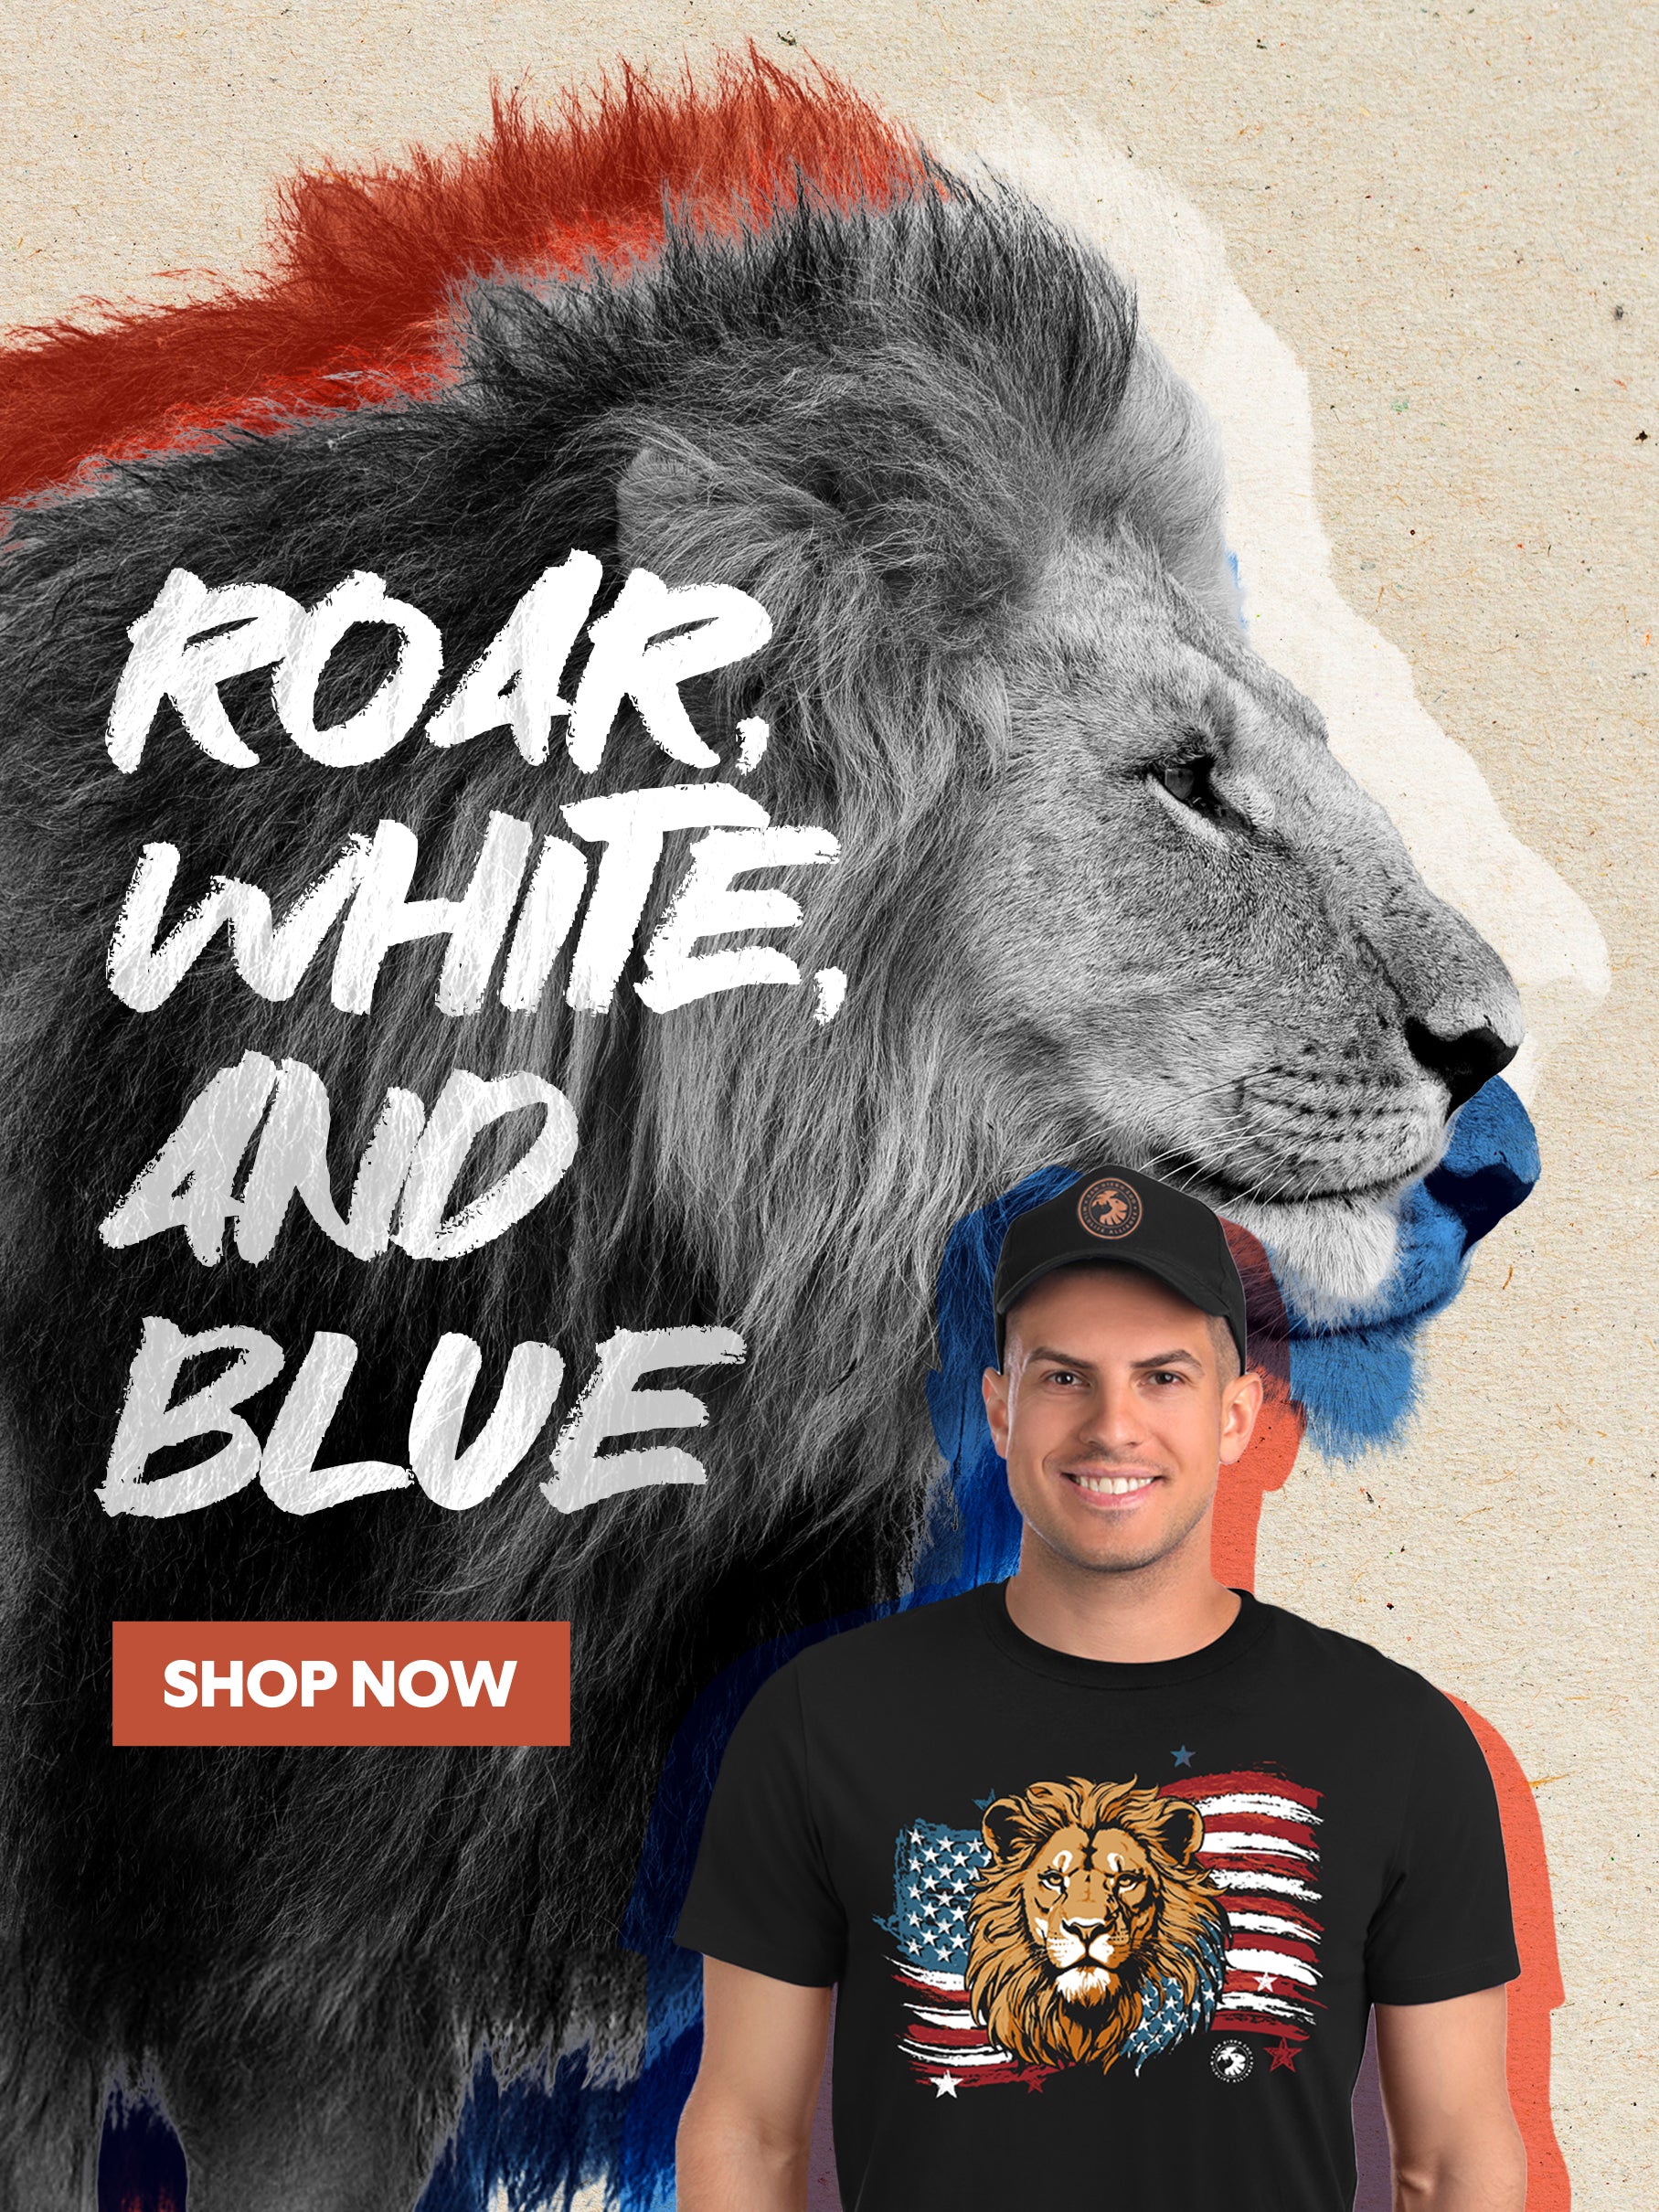 Roar, White, and Blue with Our Americana Lion Apparel